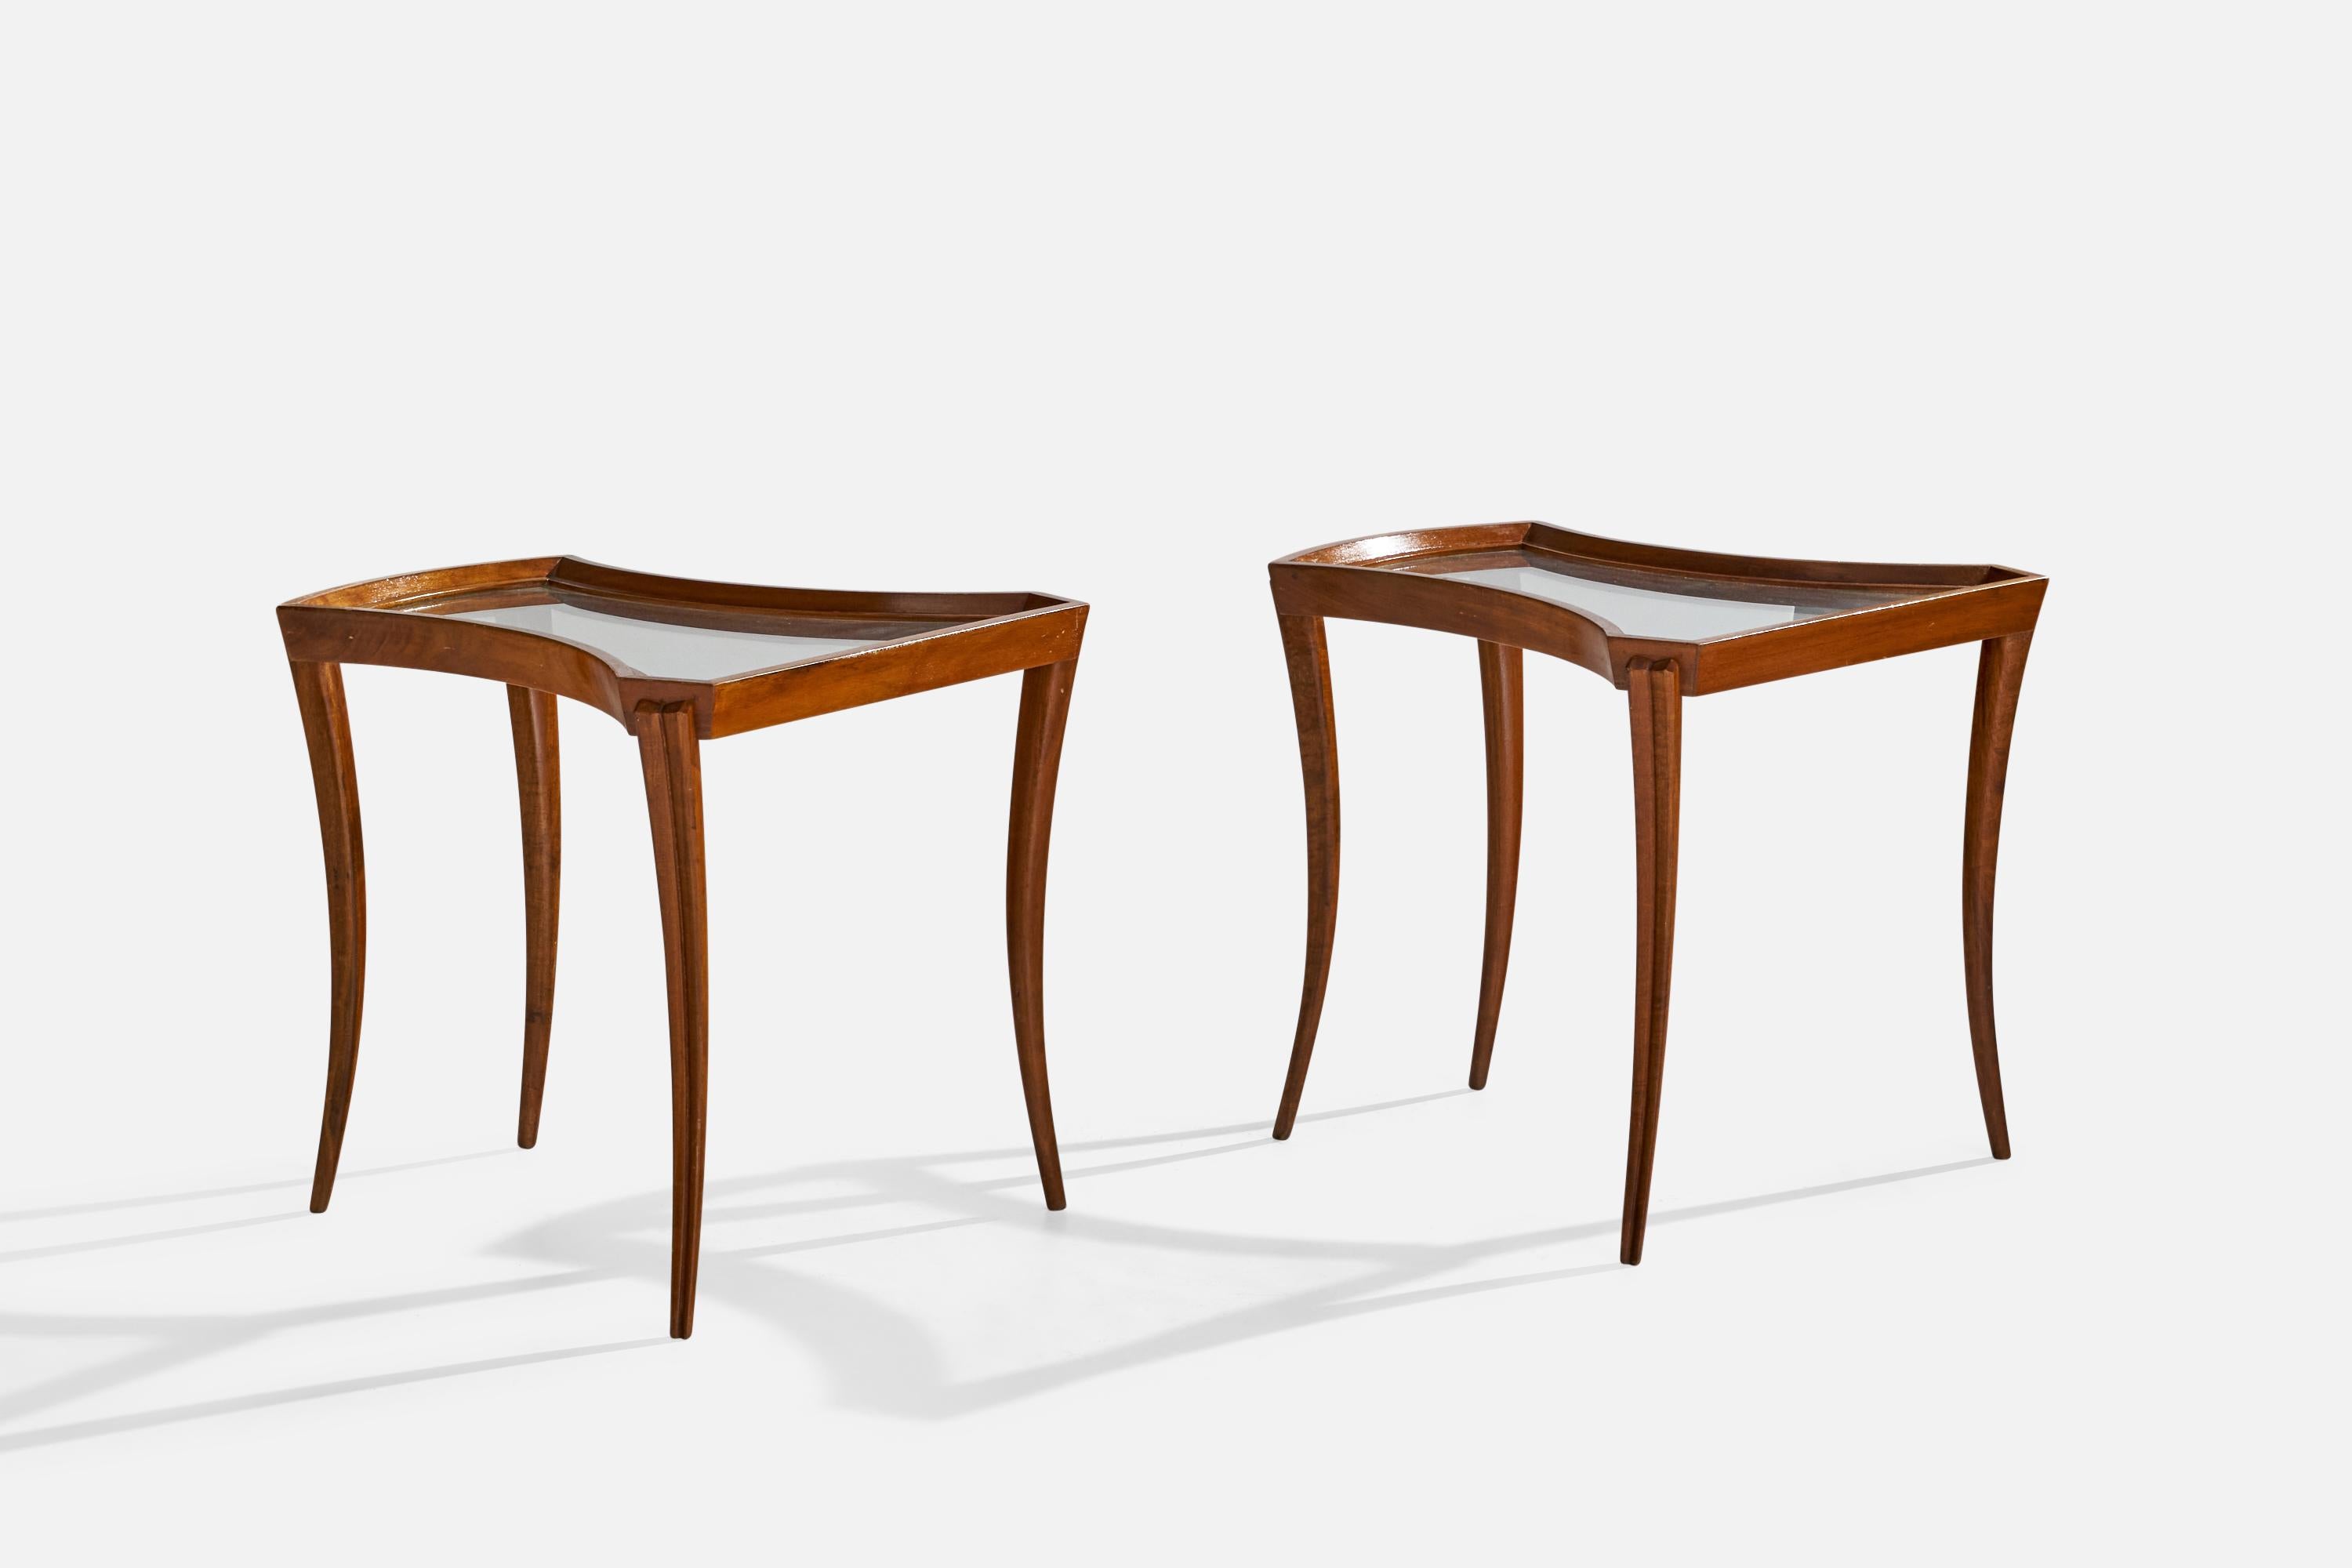 A pair of walnut and glass side tables designed and produced in the US, c. 1940s.